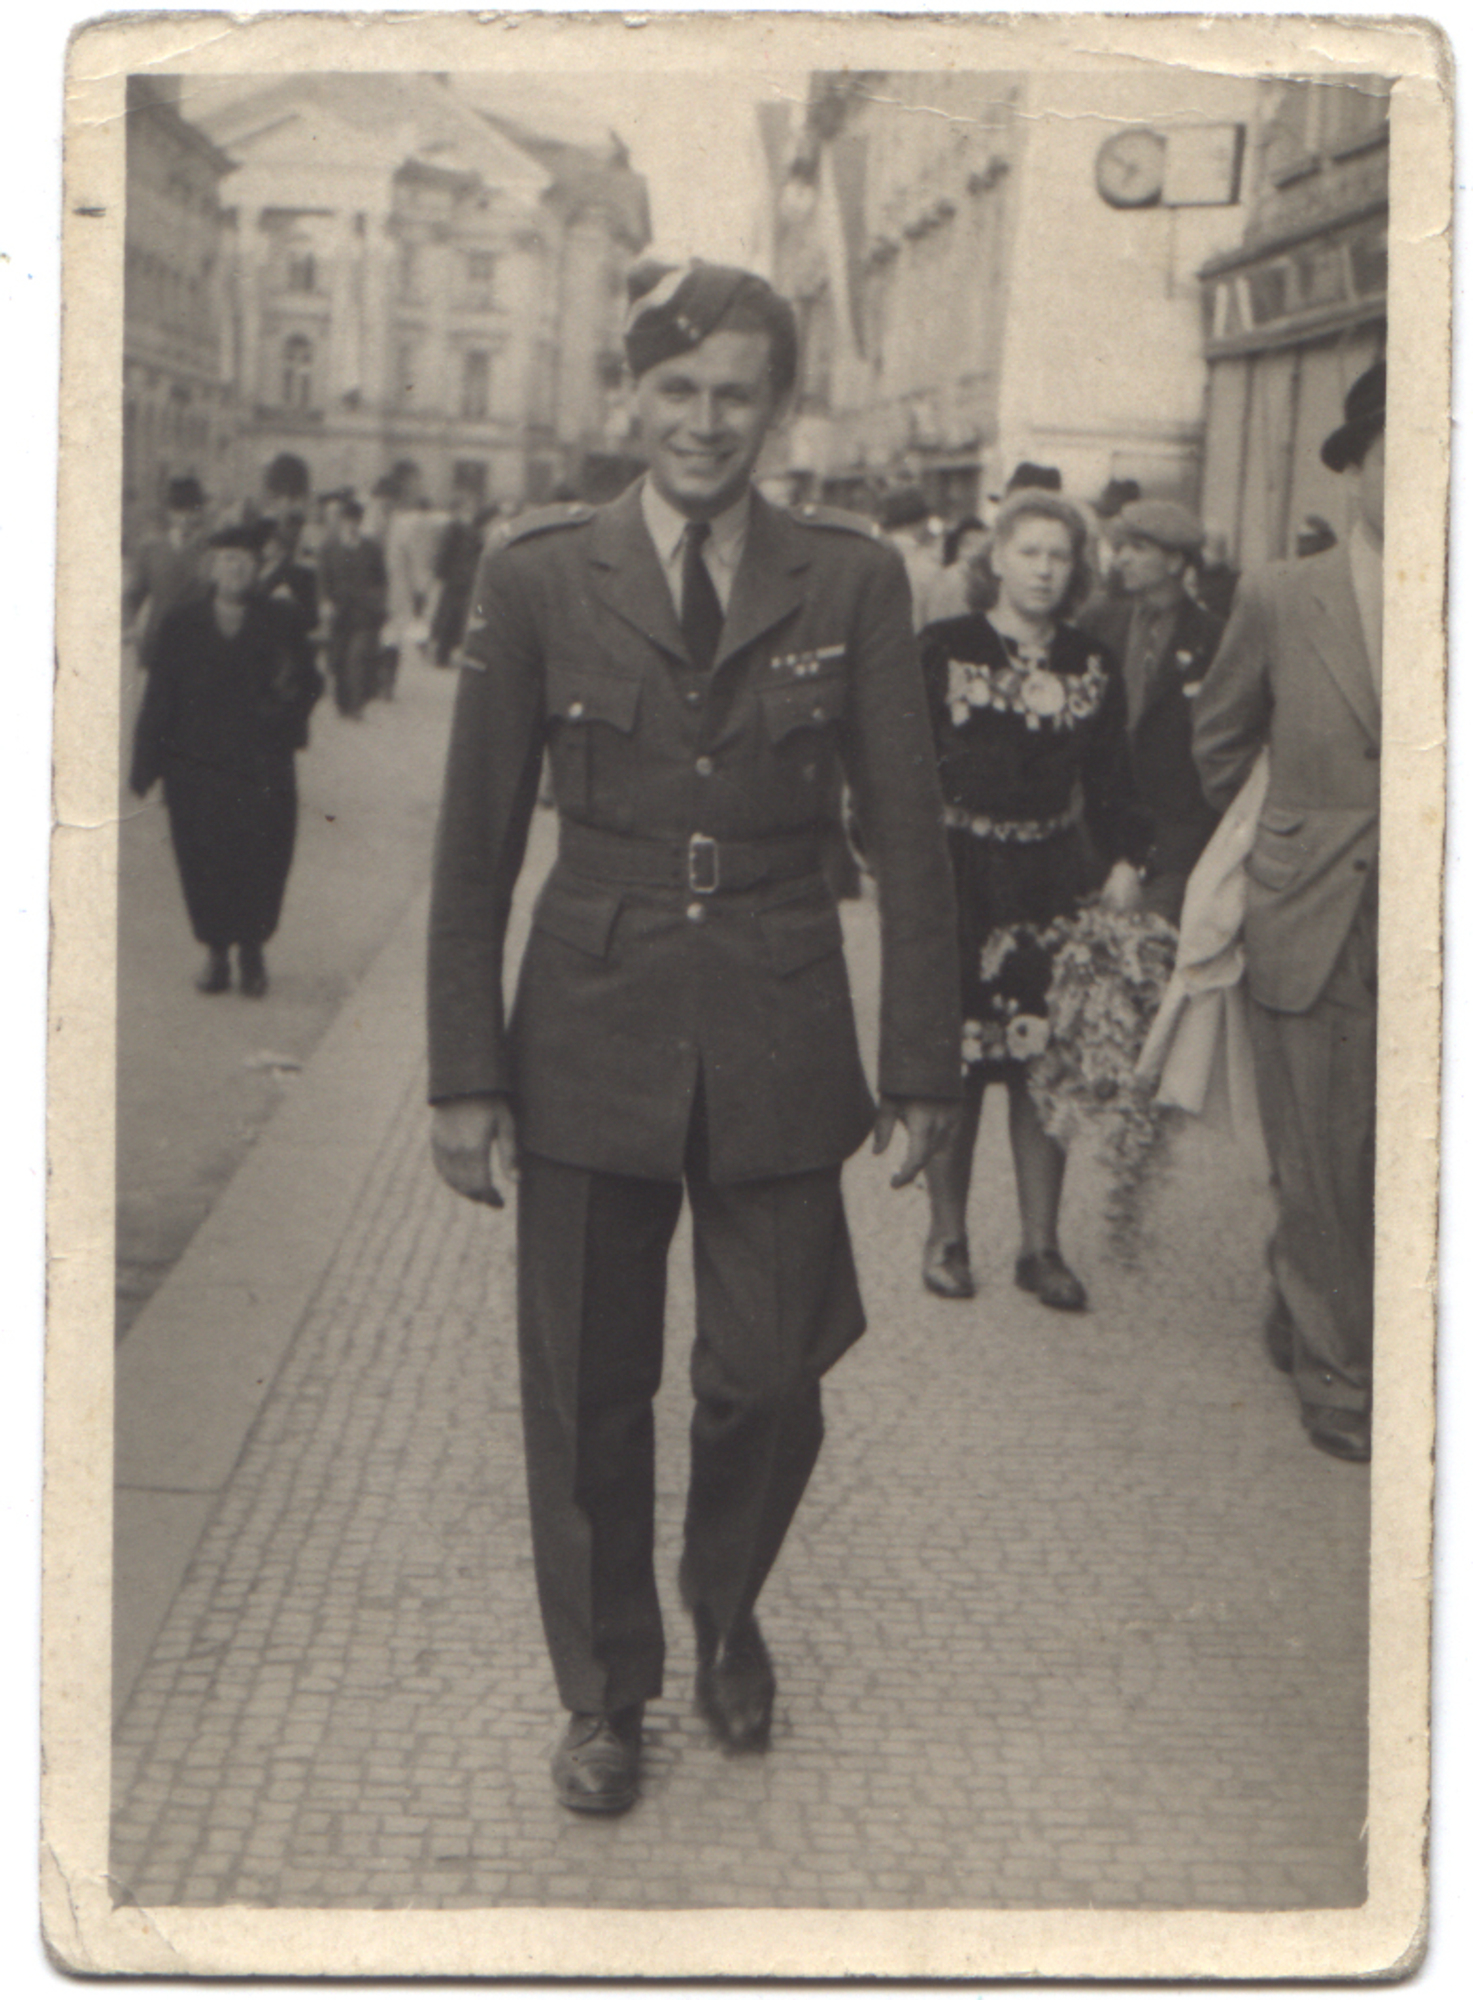 Chejstovský after the return from England, 1945